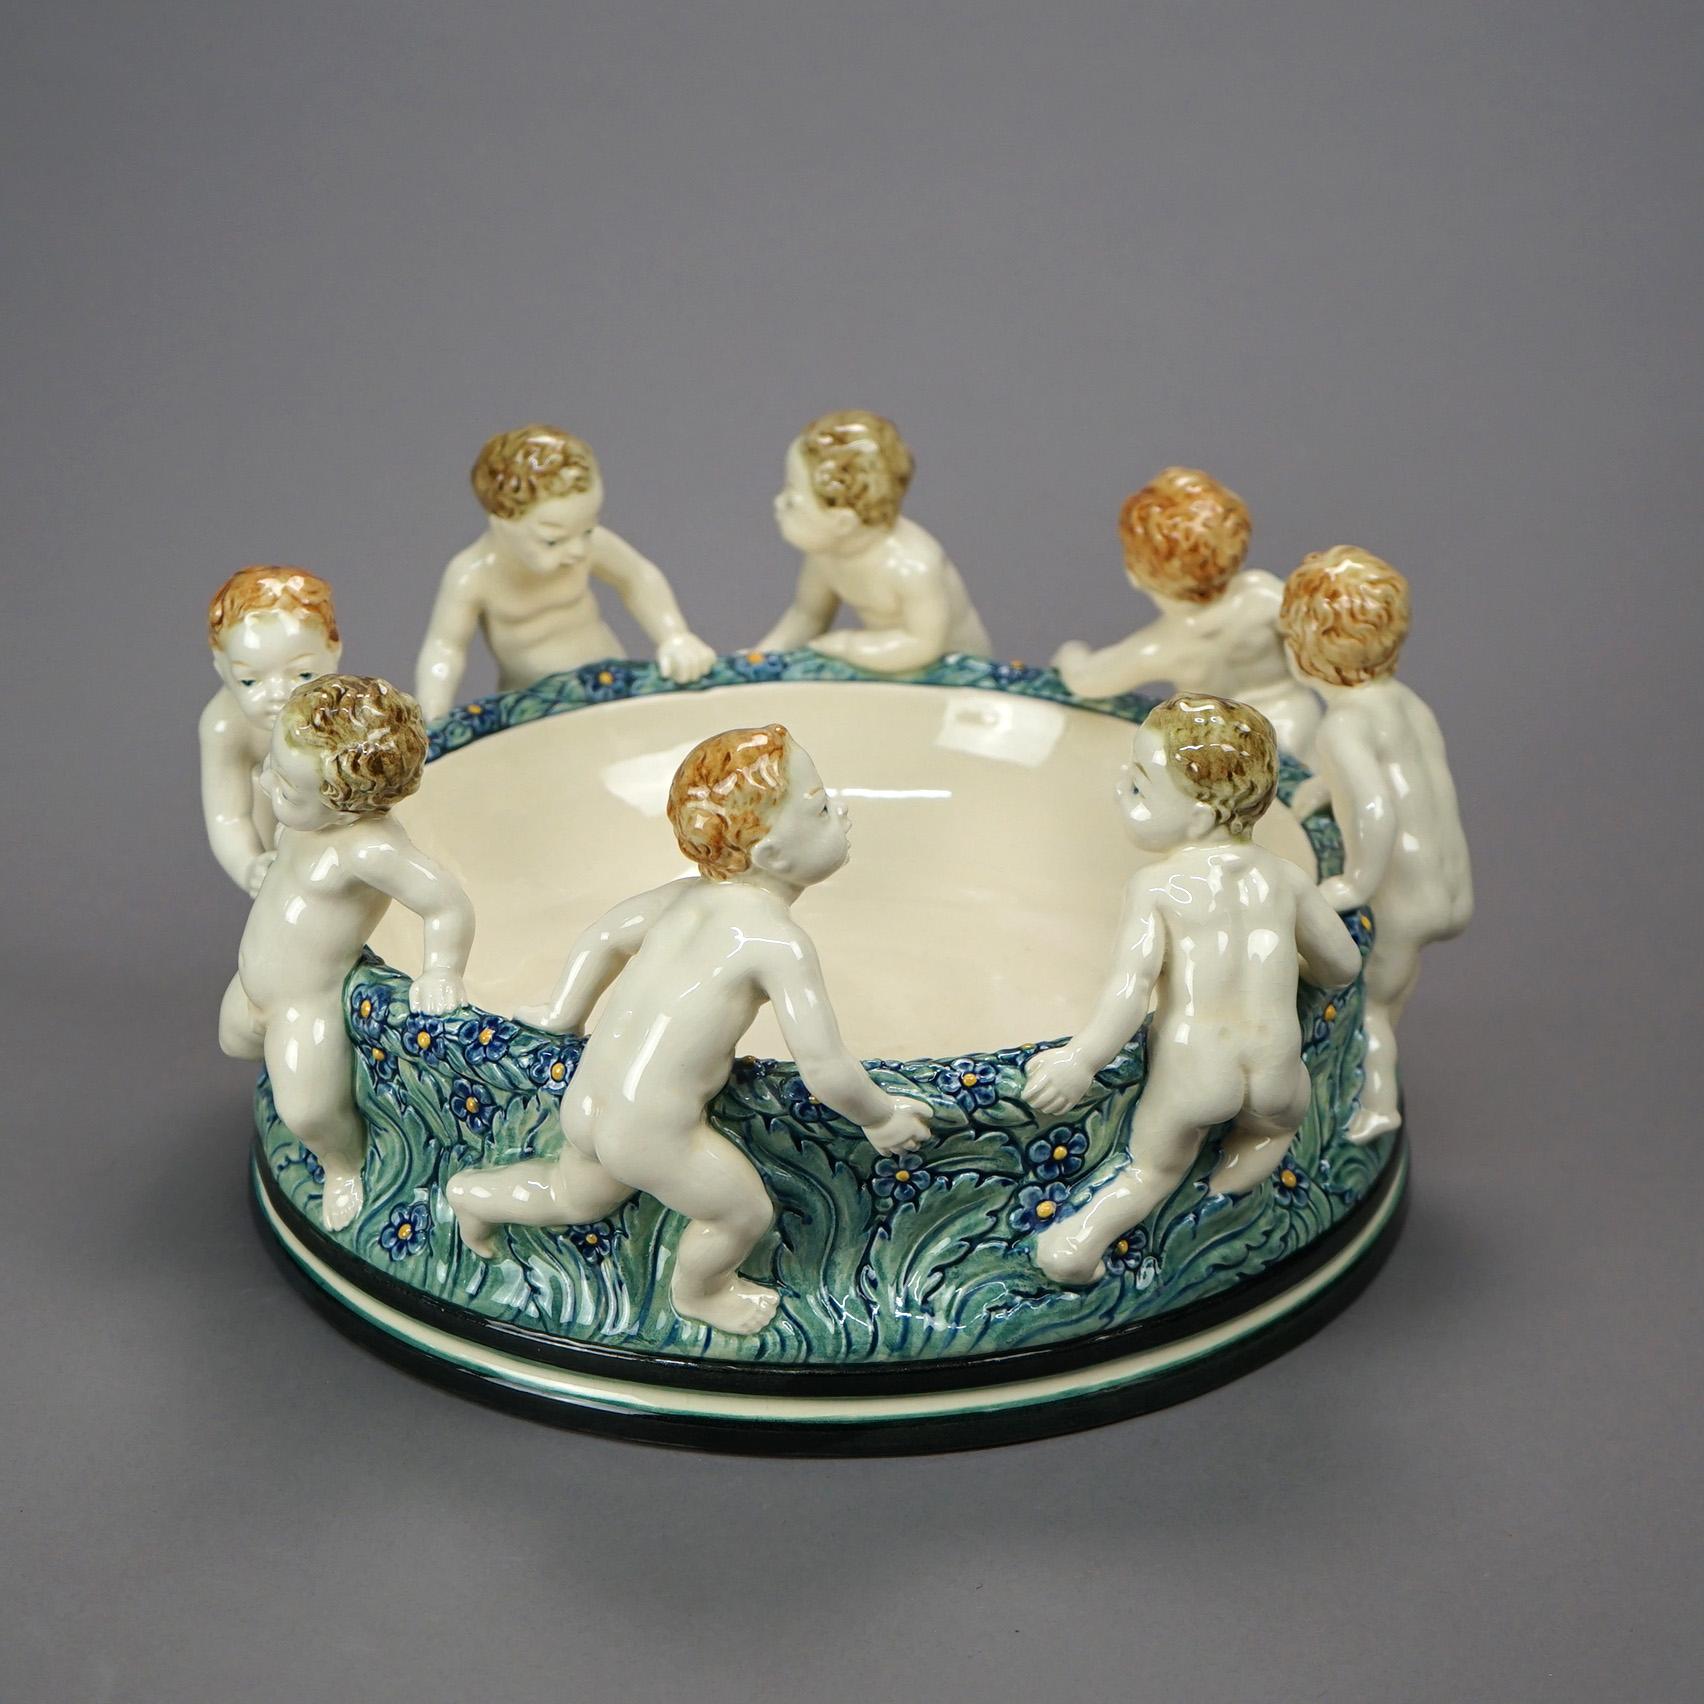 A large antique figural Wilhelm Majolica center bowl offers ceramic construction with dancing cherubs, maker marks as photographed, c1900

Measures- 6.75''H x 12.75''W x 12.75''D.